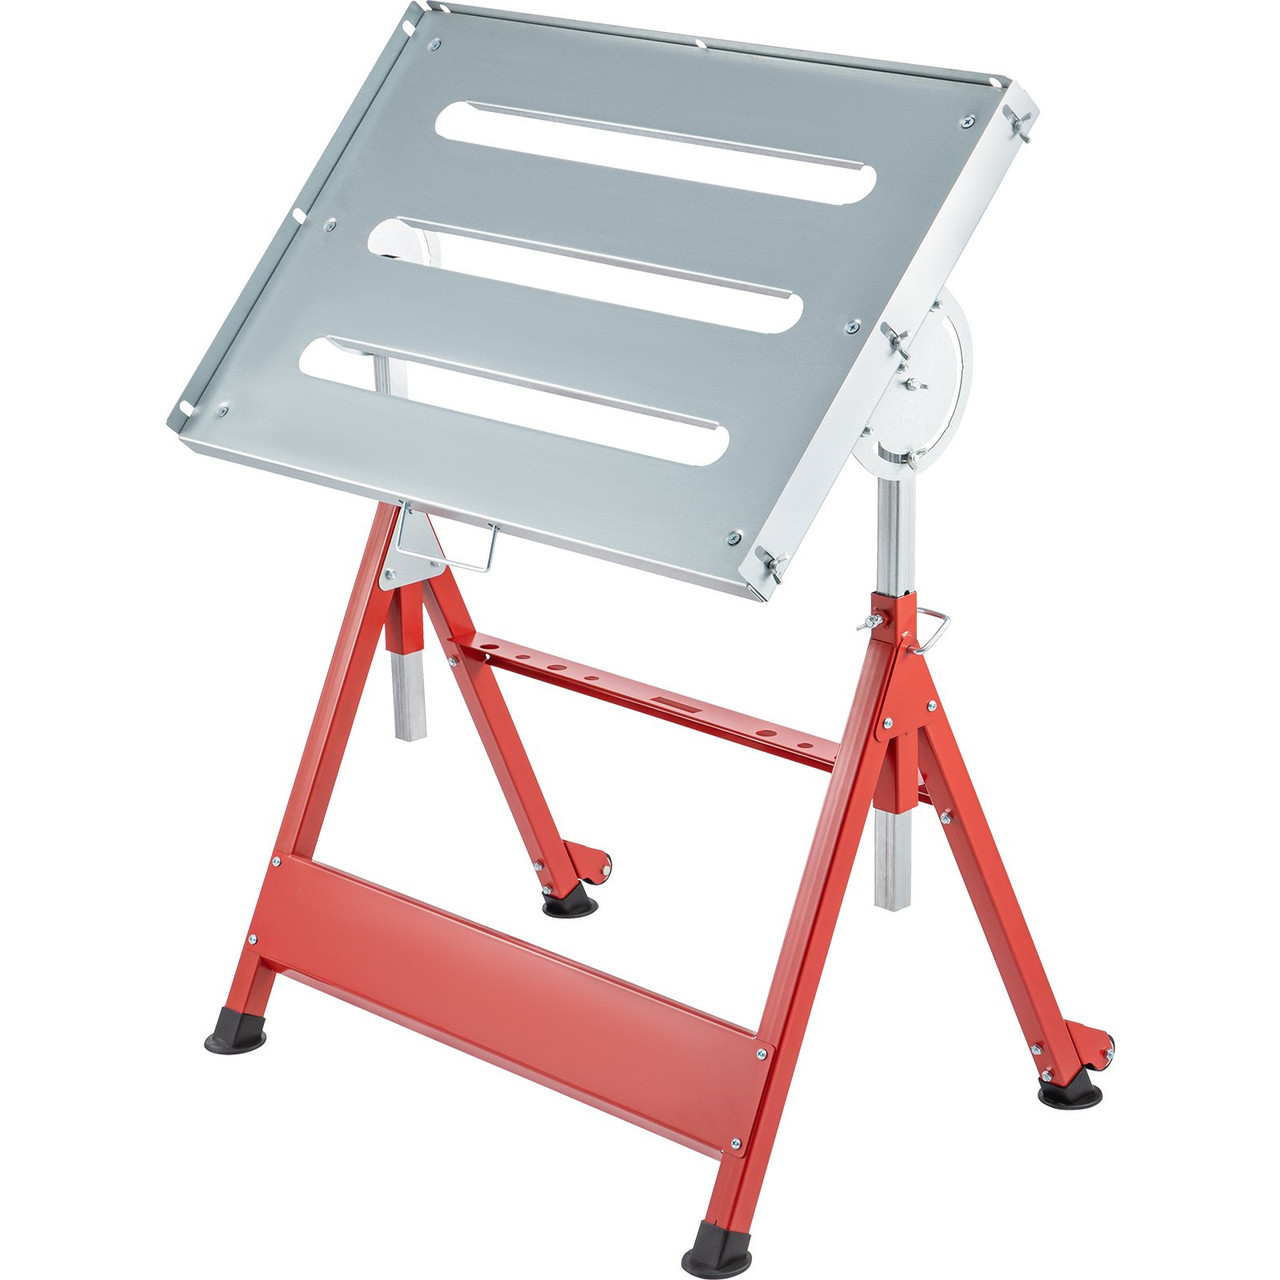 Welding Table 31'' x 23'' Steel Welding Table Nine 1.1 in. / 28mm Slots Welding Bench Table Adjustable Angle & Height Portable Table, Casters, Retractable Guide Rails, Eccentric Leveling Foot